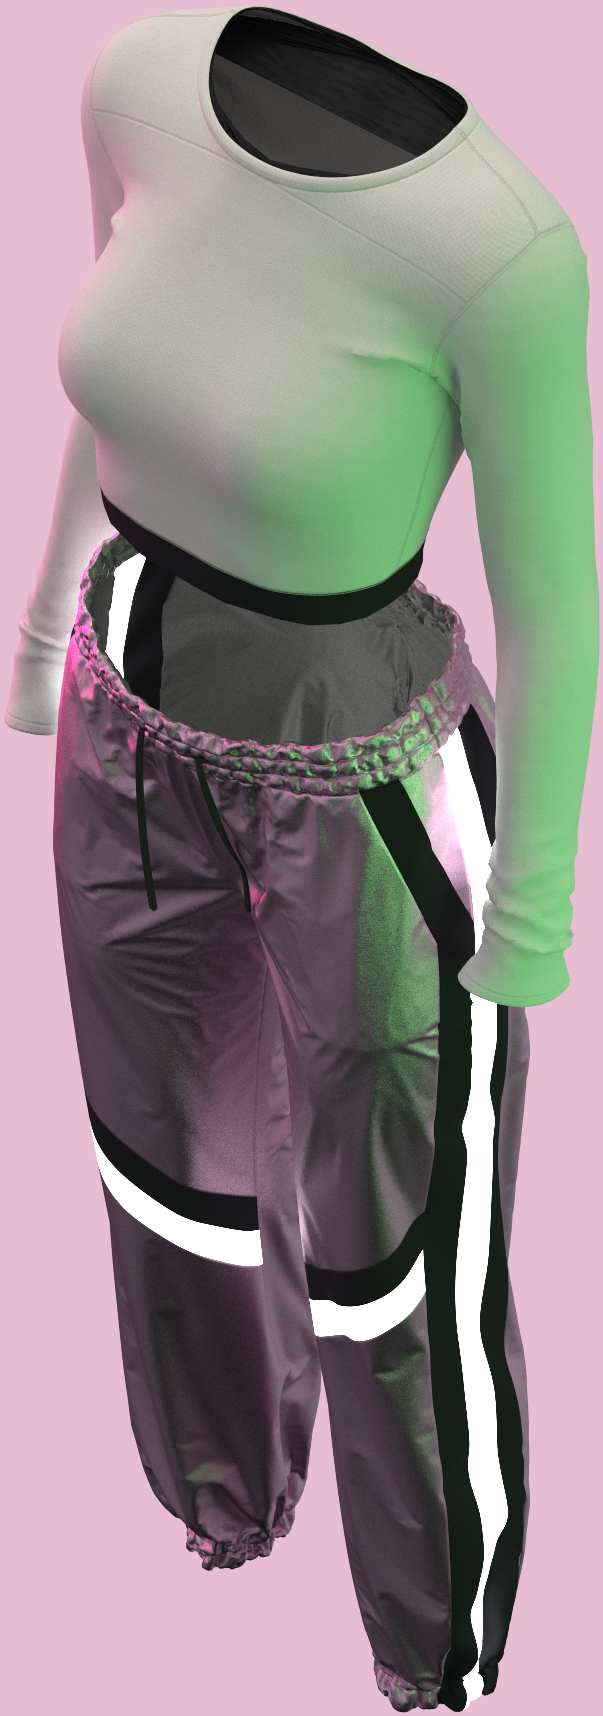 Reflective_Jogger_and_Crop_Top_Closet_Library_Fabric__Colorway_A_Copy_9_2.png